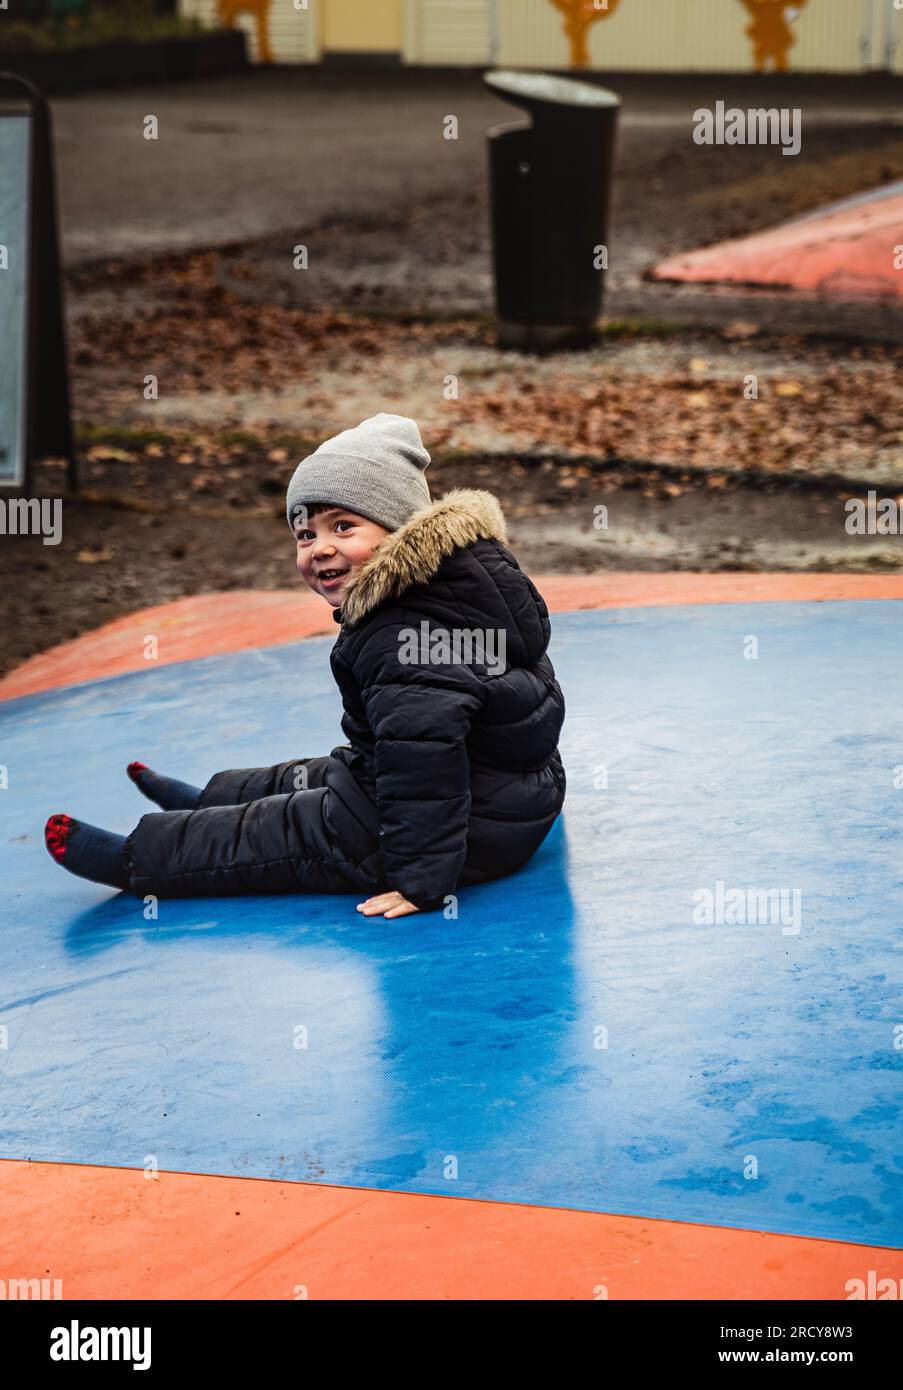 Mischievous smile of a boy sitting on a trampoline. Kid with cunning look laughing on a bouncer in a playground. Kid with cheerful smile or expression Stock Photo